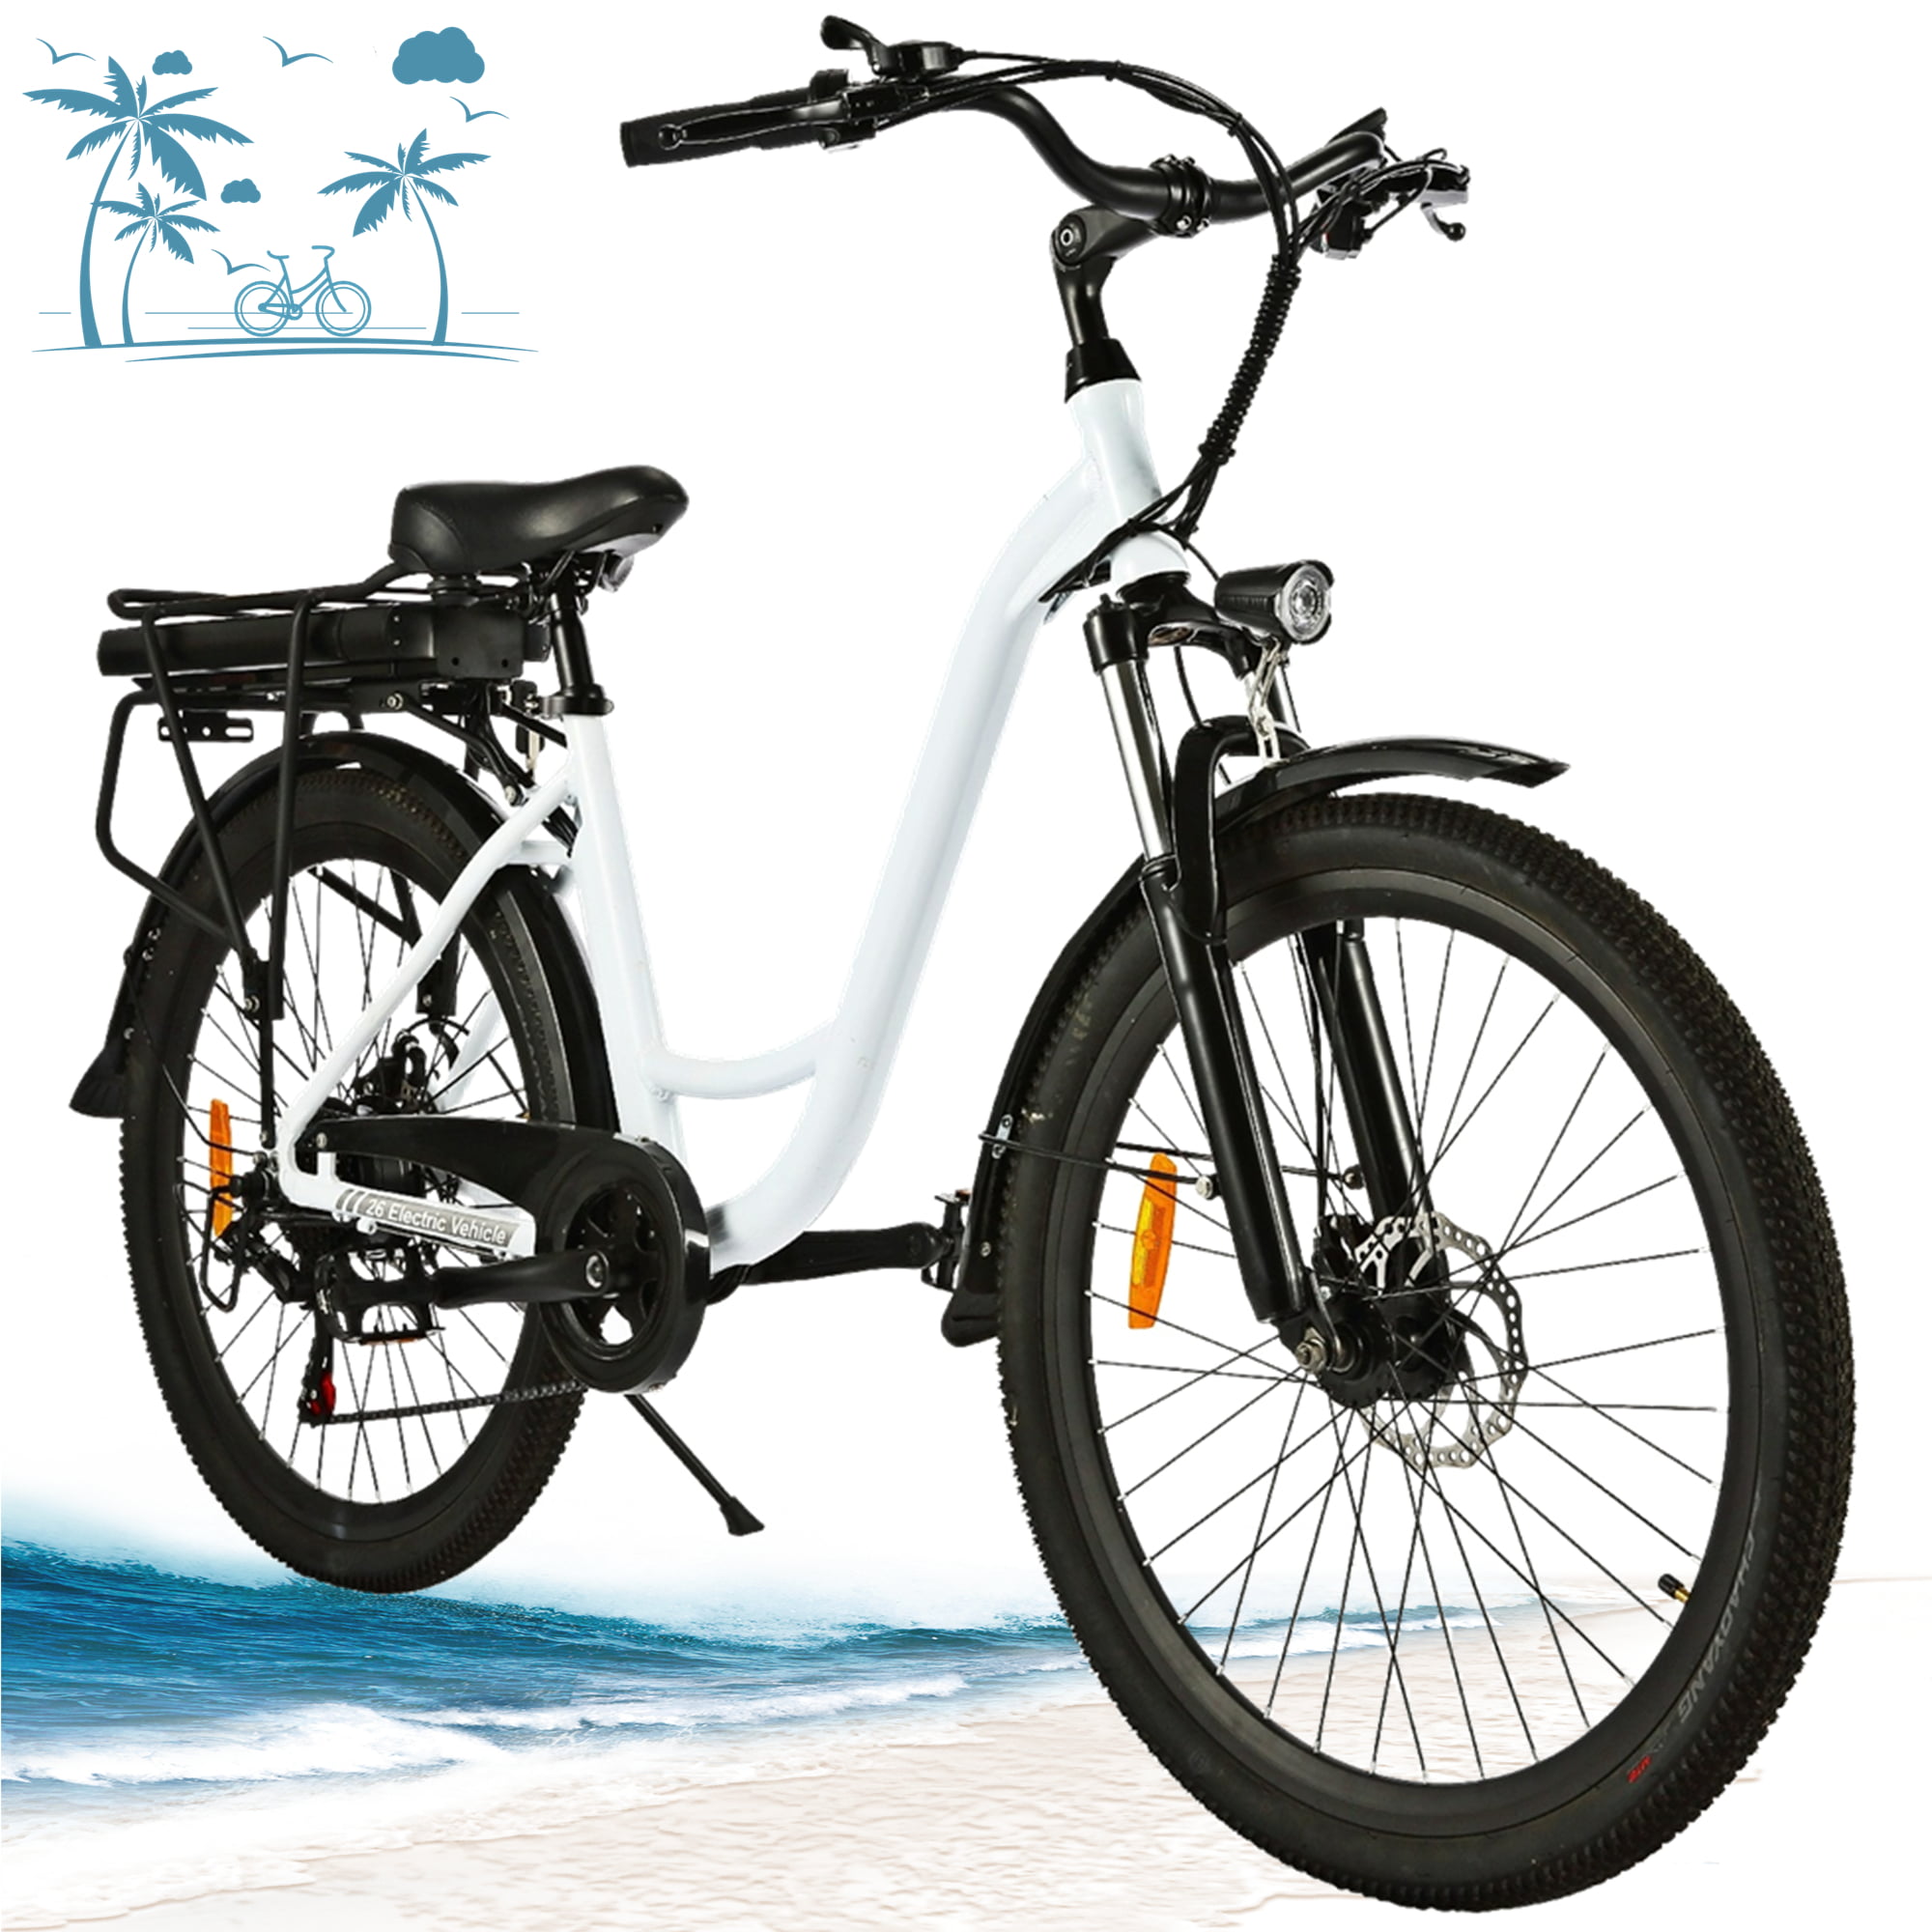 Ayner 26'' Electric Bike, Beach Cruiser Electric Bicycle with Removable 12.5Ah Battery Step-Through Frame Commuter Ebike for Adults Walmart.com